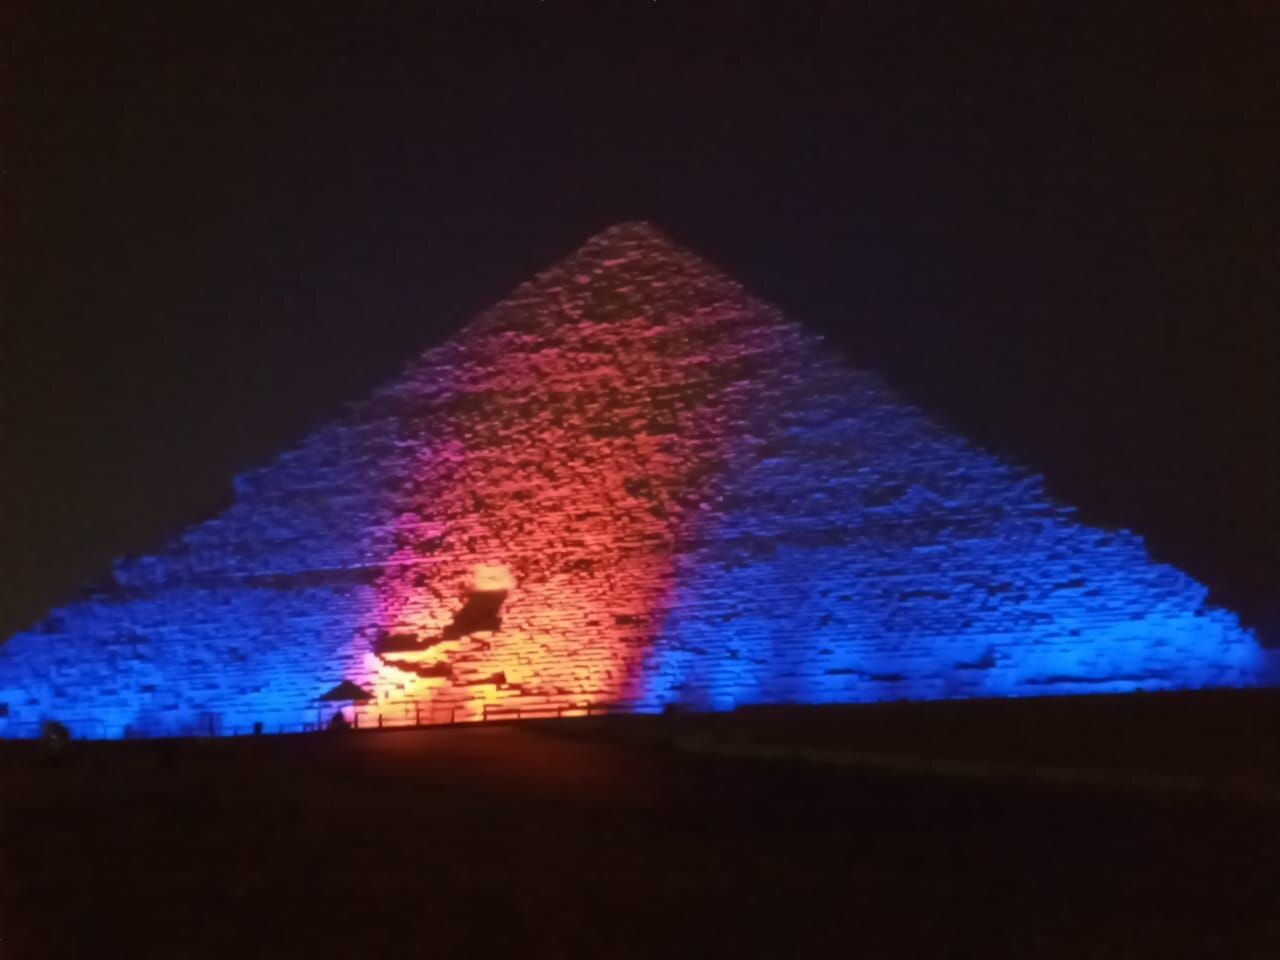 The pyramid of Cheops in Egypt lit up with blue and orange light